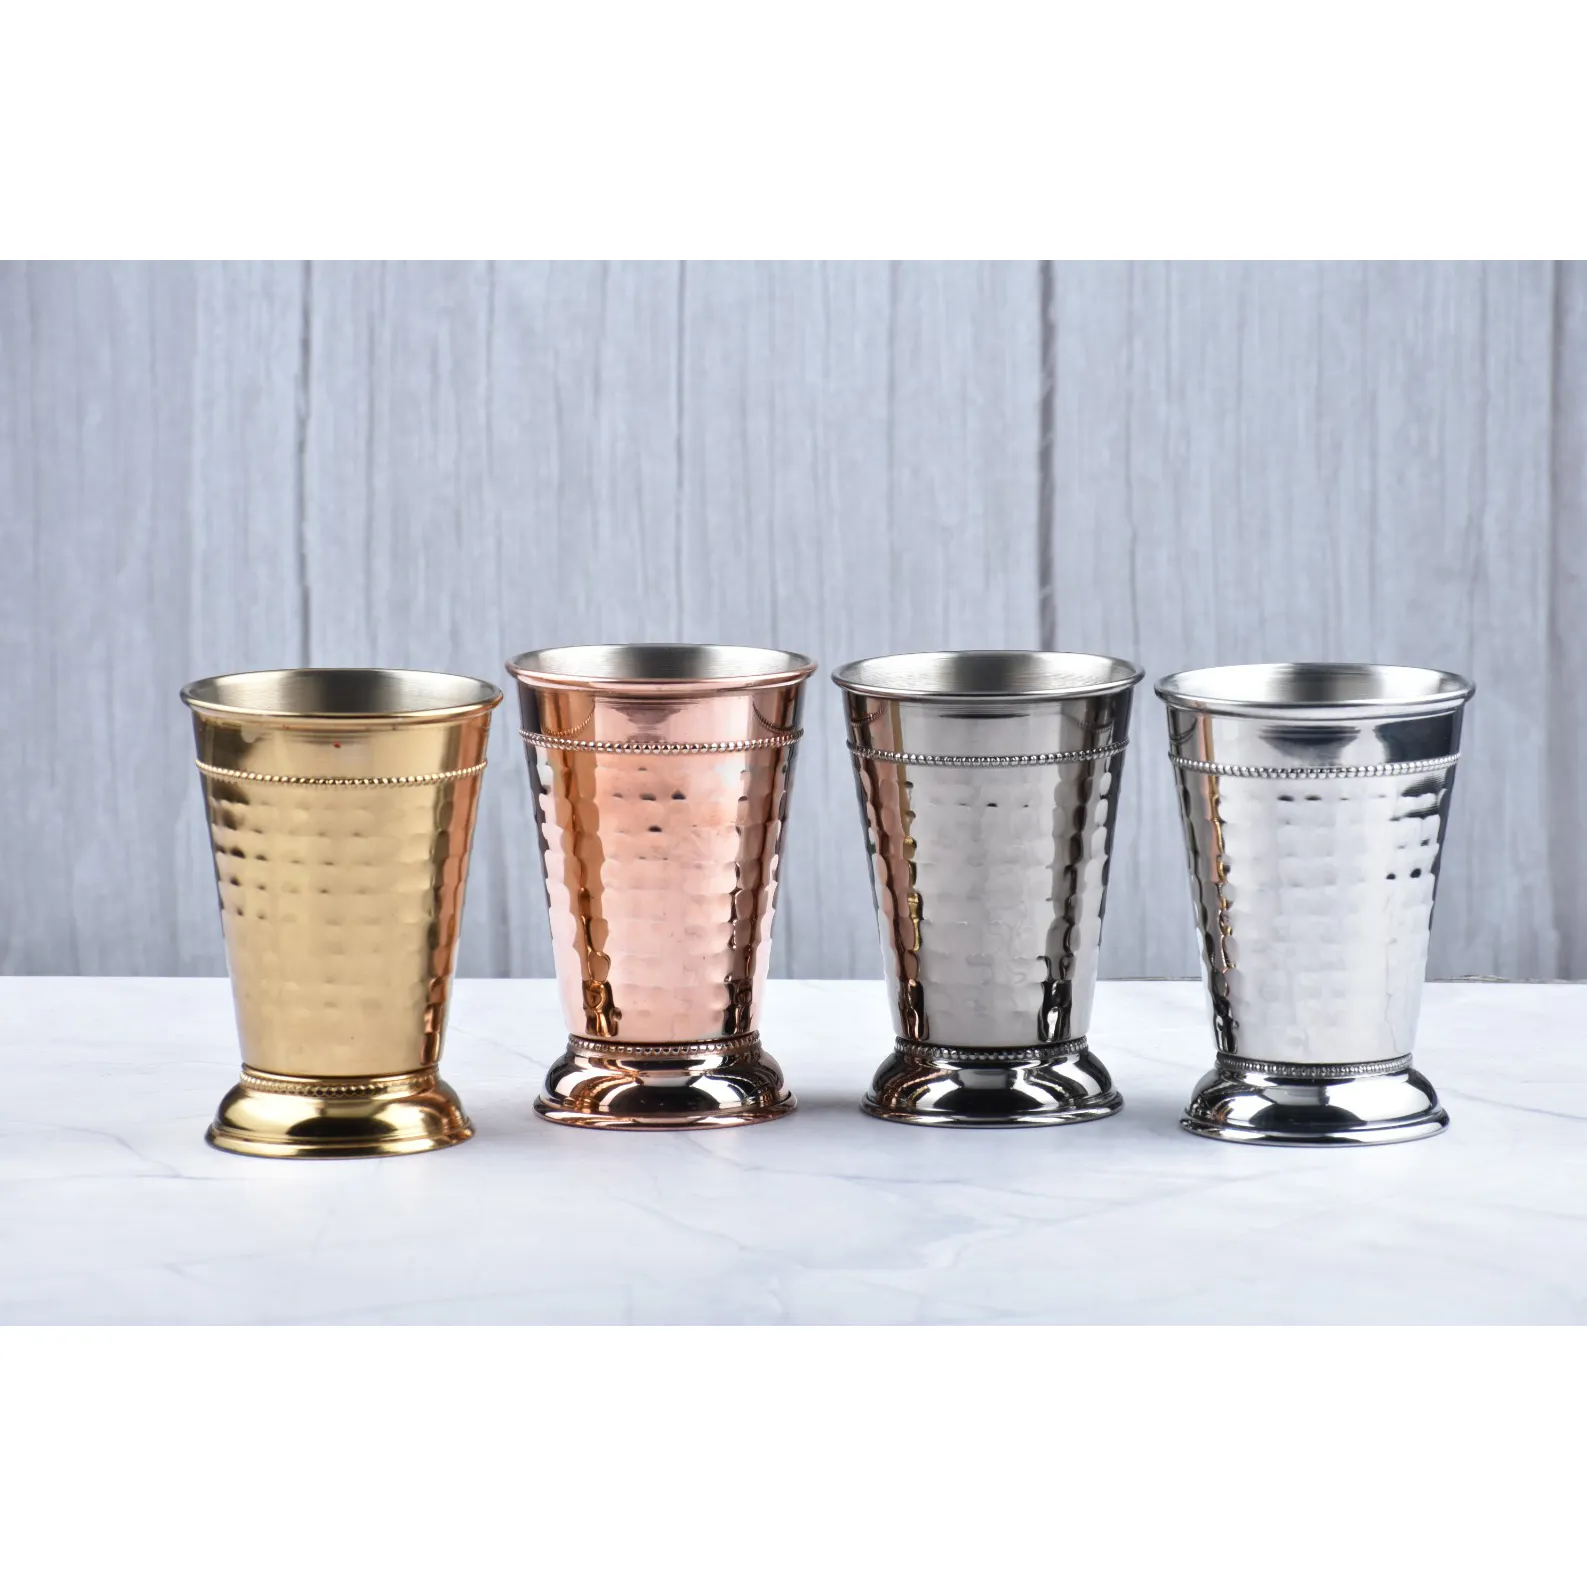 Wholesale Stainless Steel Material Glass Wine Glasses Lemonade Glasses Julep Cups Sets Hammered Finished For Home And Parties